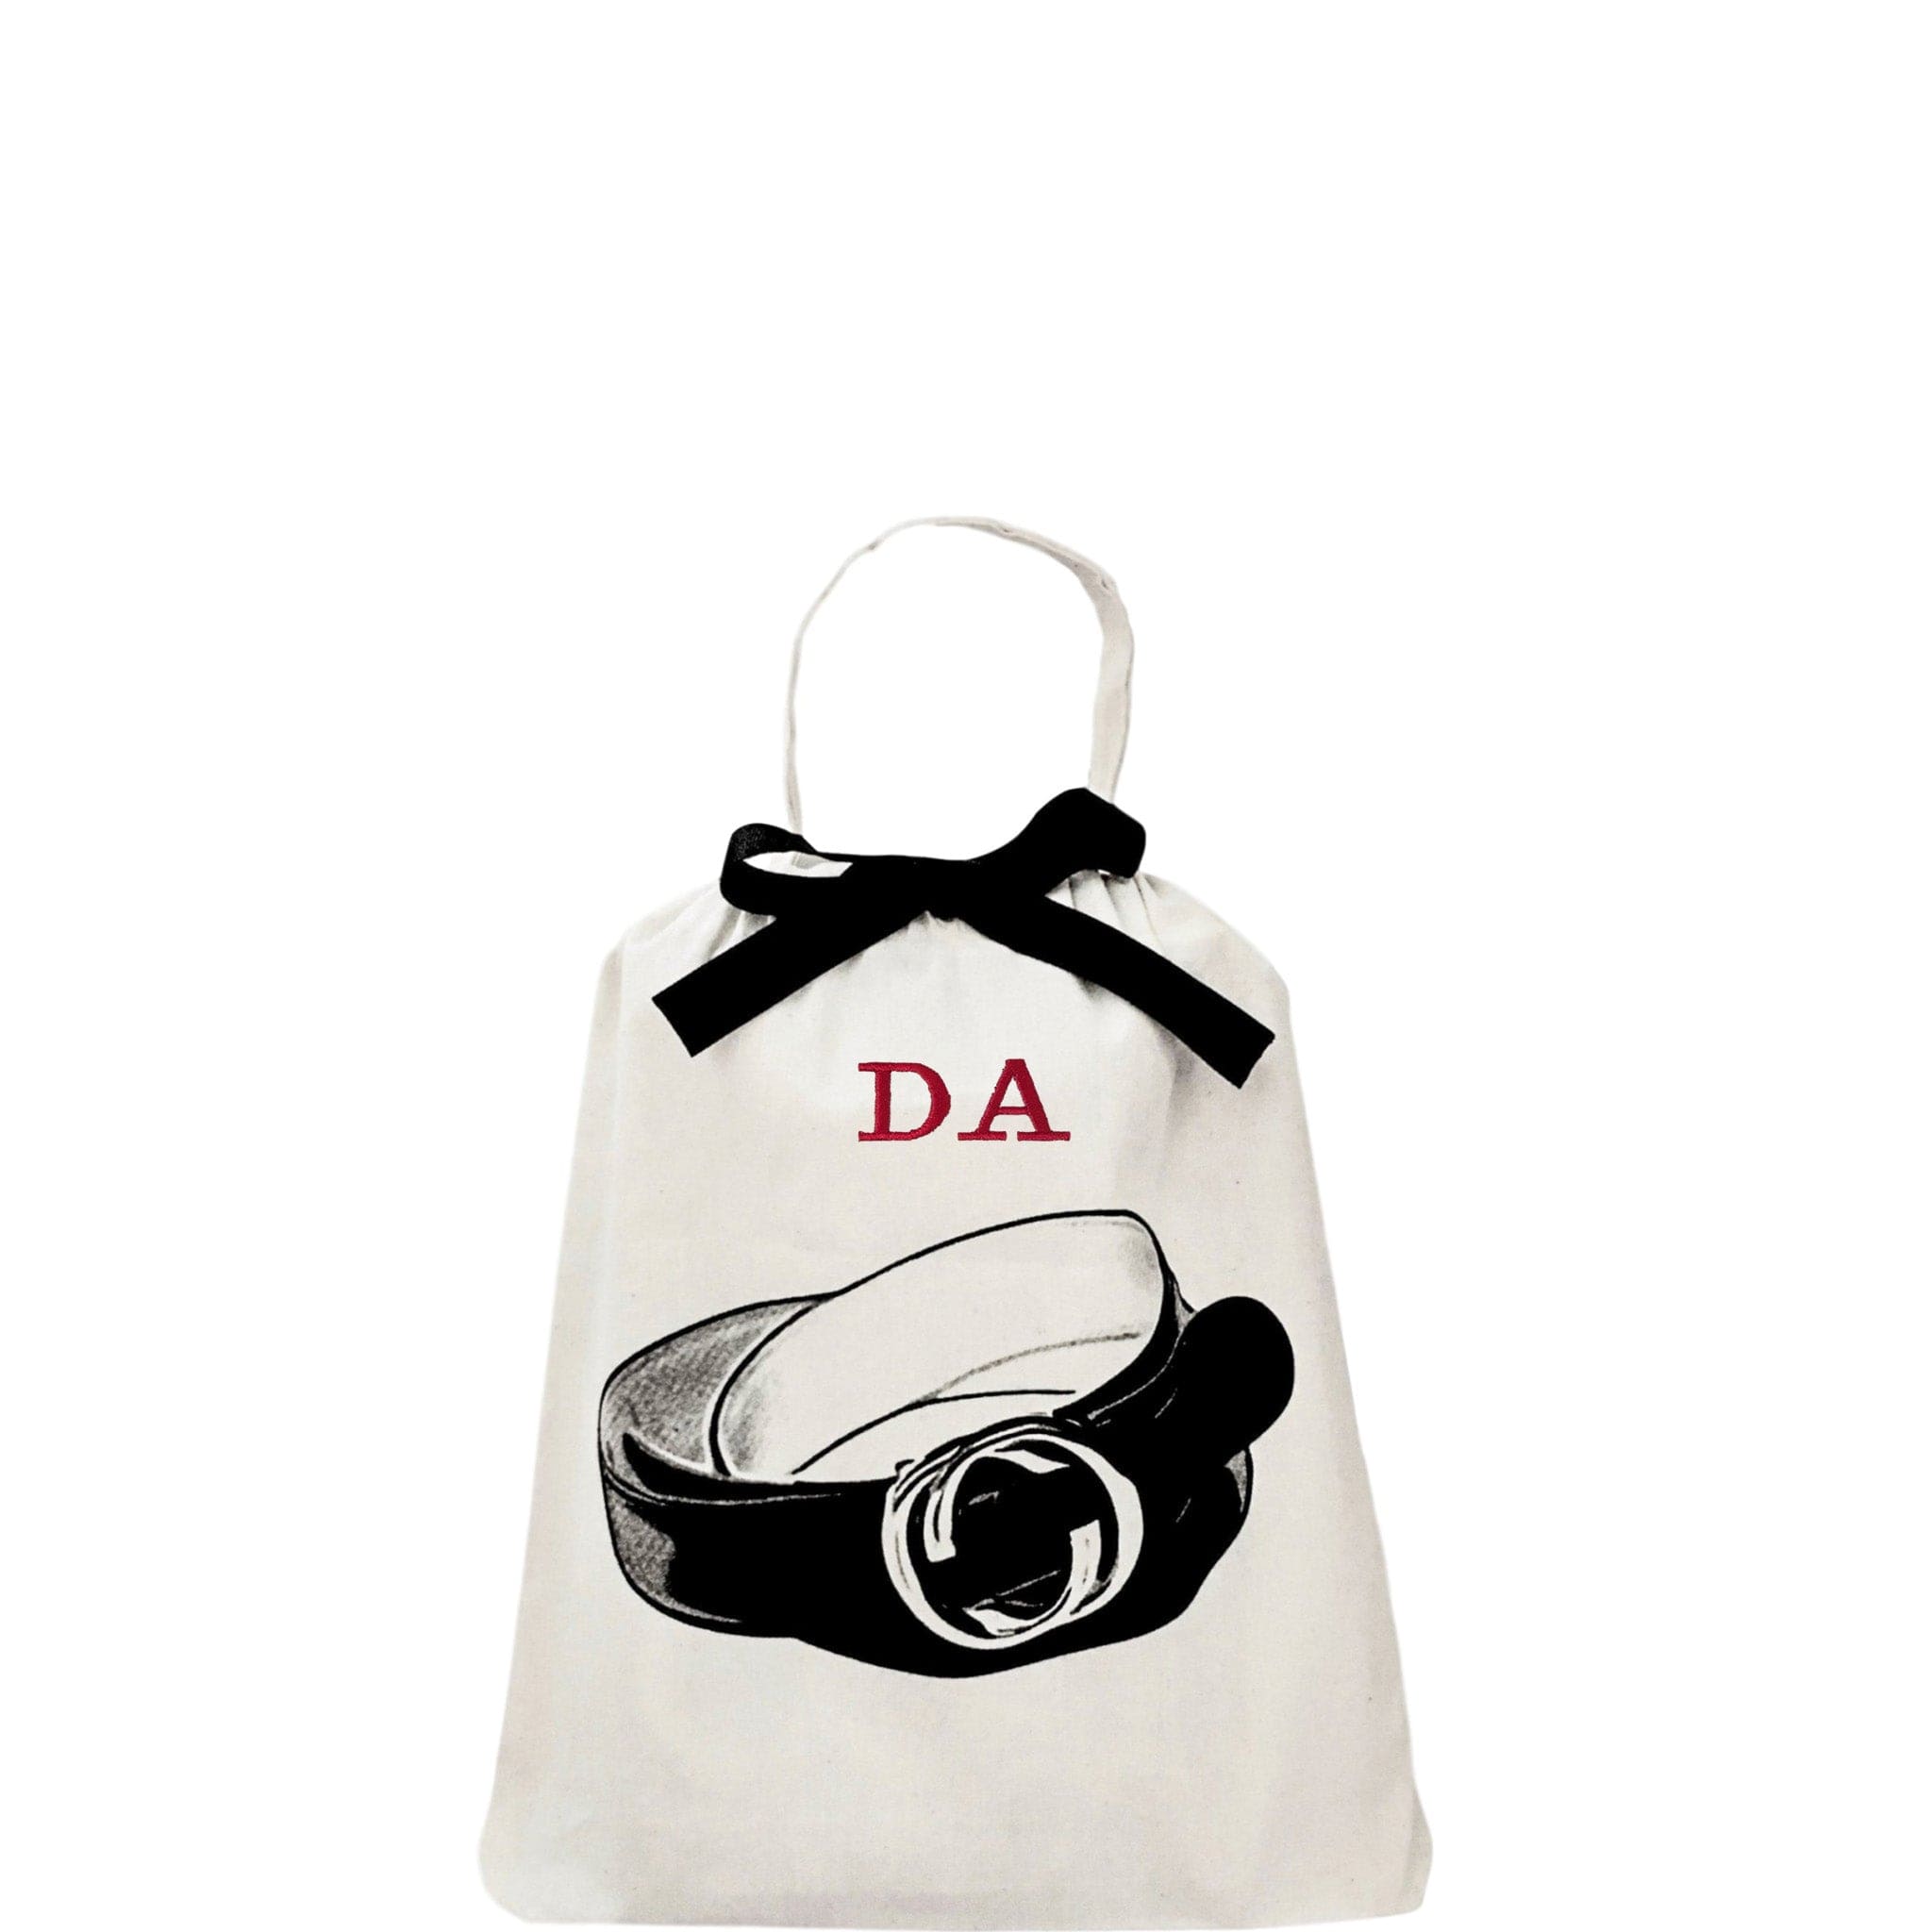 a belt dust bag with "DA" monogrammed on the top. 